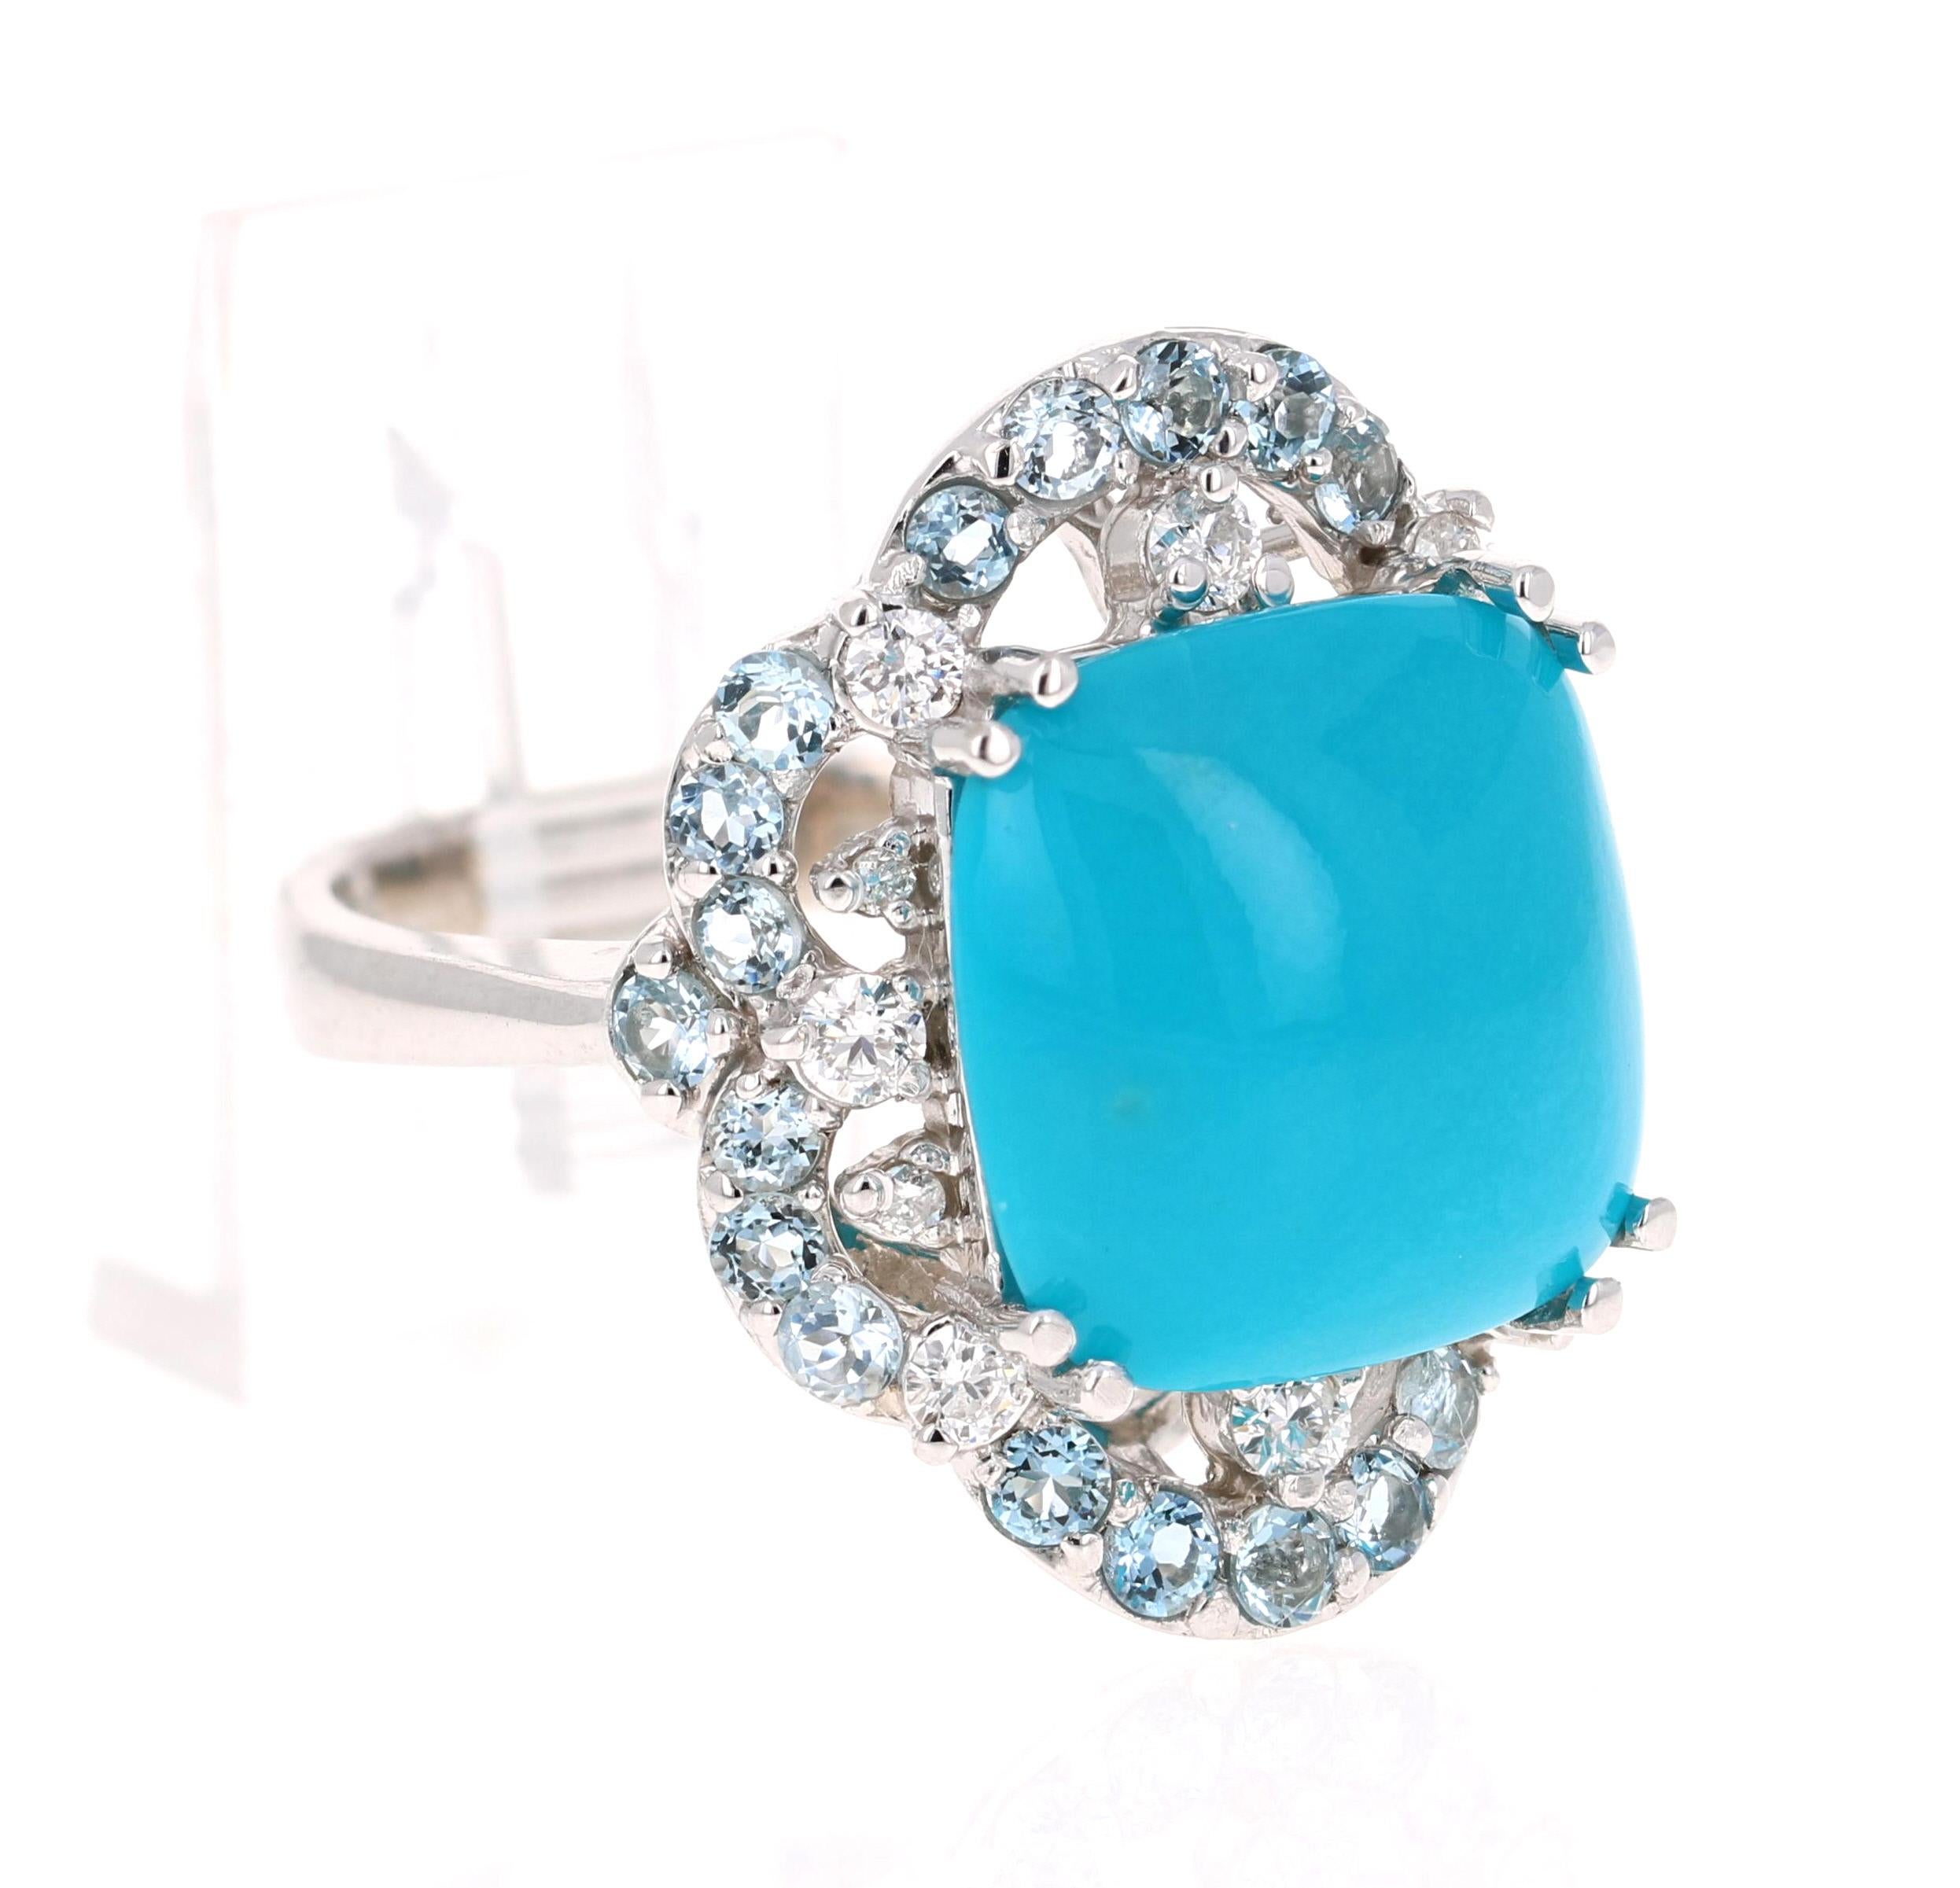 
The Cushion Cut Turquoise is 9.42 Carats and is surrounded by beautiful Aquamarines weighing 1.13 Carats. Also it has 12 Round Cut Diamonds weighing 0.41 Carats. (Clarity: SI, Color: F) The total carat weight of the ring is 10.96 Carats. The